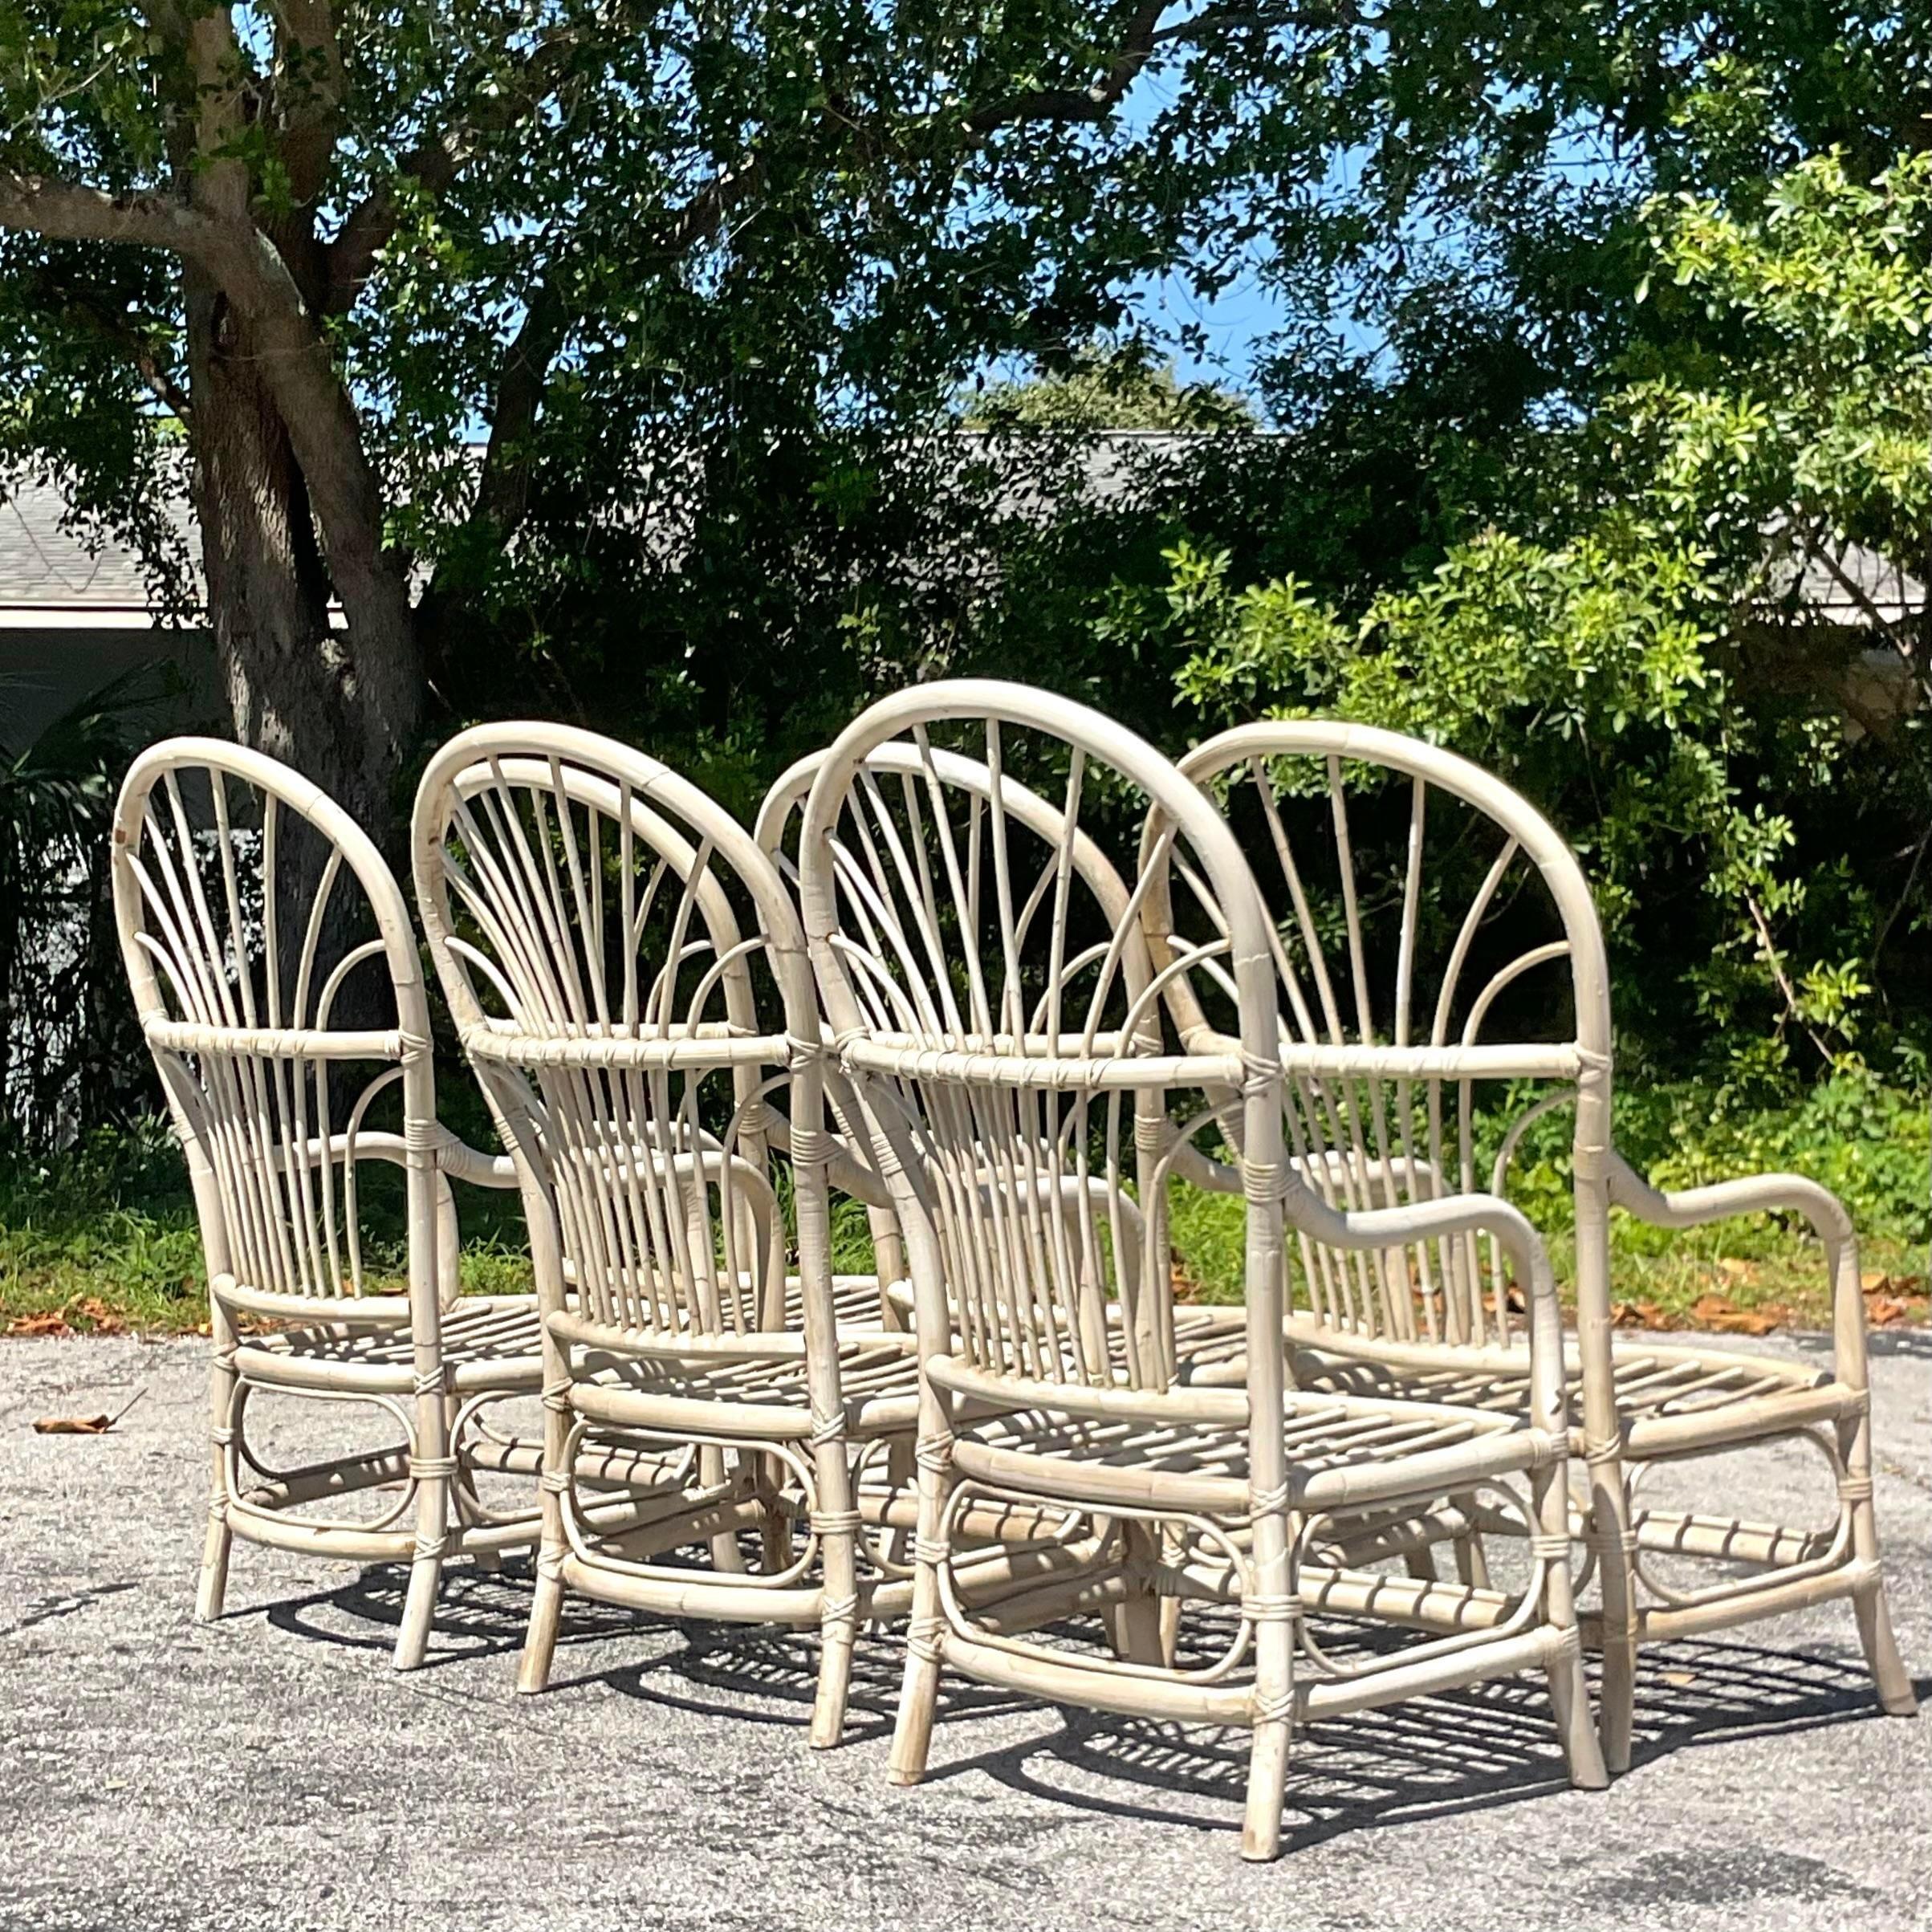 Philippine Vintage Coastal High Back Rattan Dining Chairs - Set of 6 For Sale